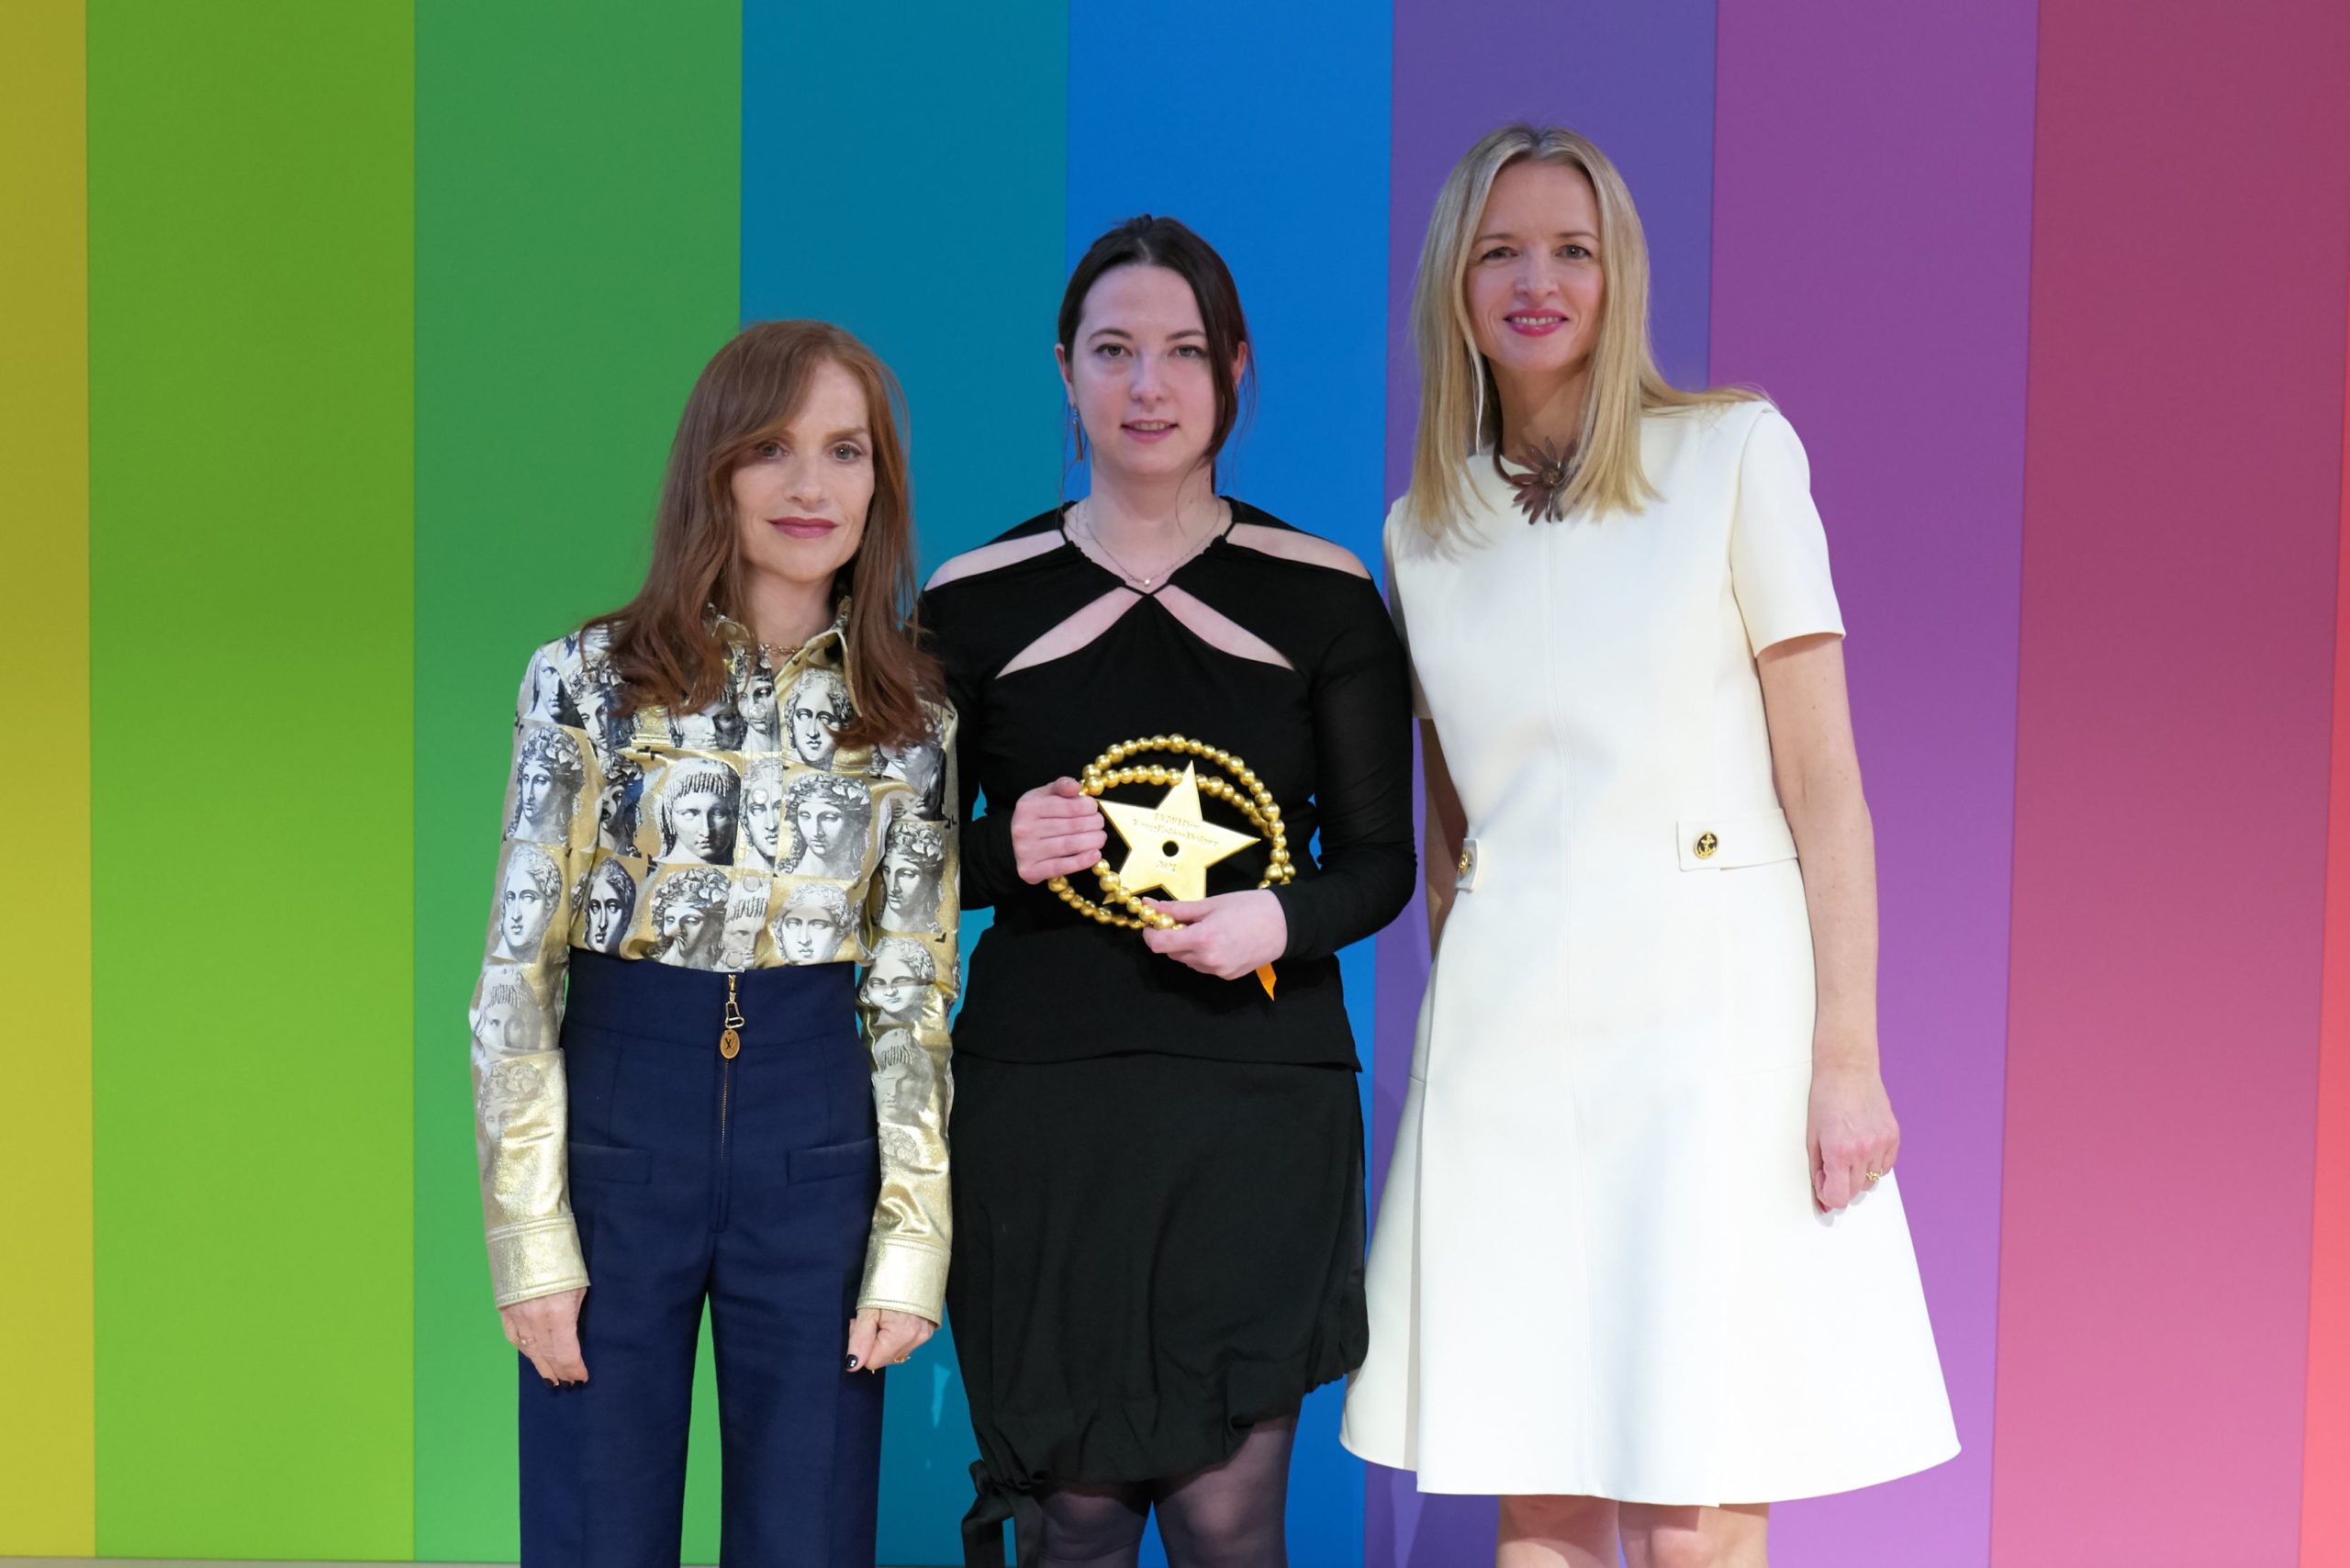 2021 LVMH Prize for young fashion designers – 8th edition: LVMH announces  the date of the 2021 final - LVMH